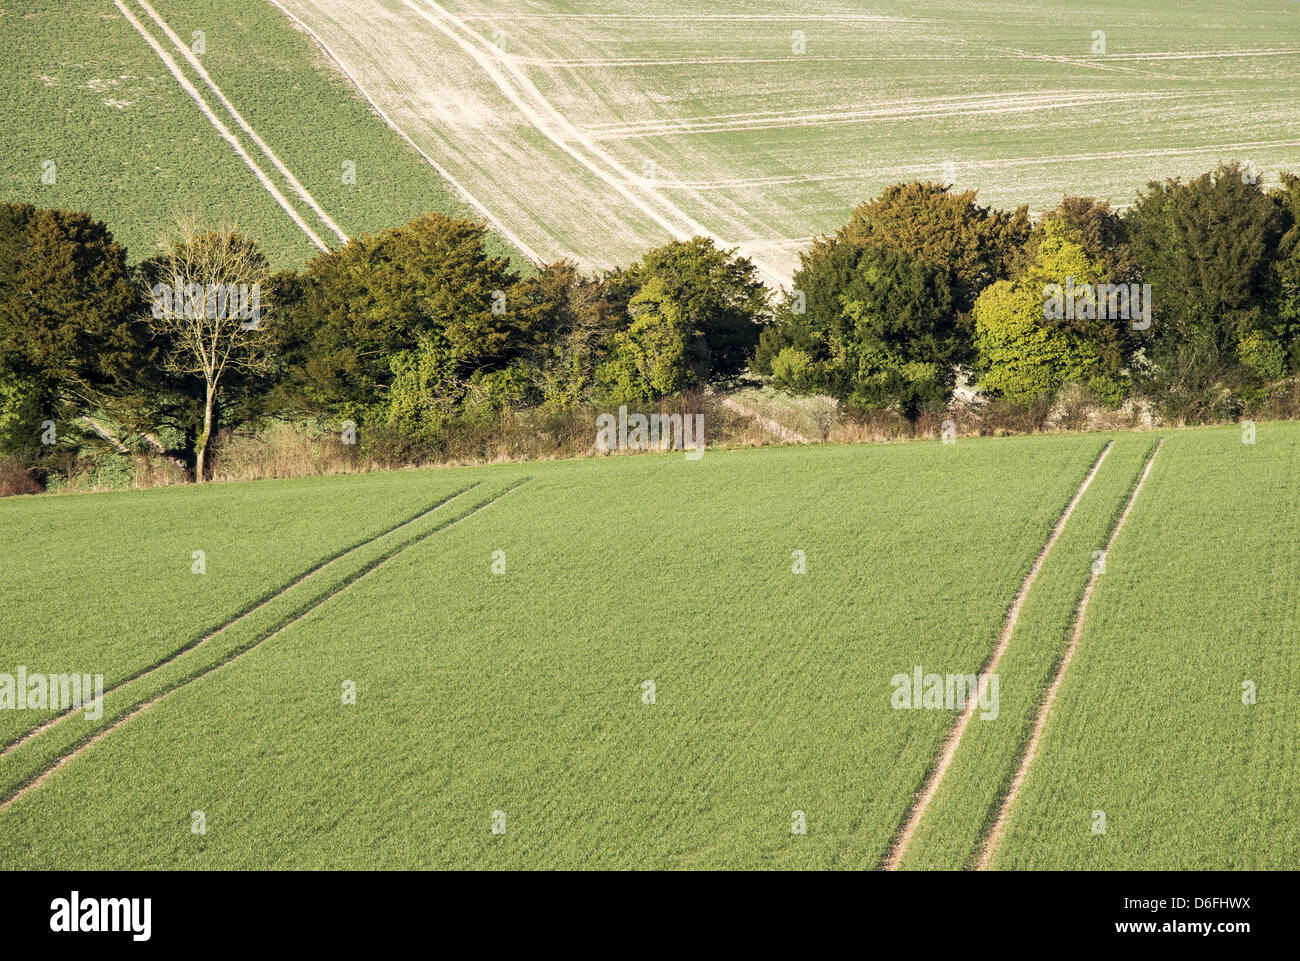 Abstract shot of the English countryside showing tree line and field of various shades of green Stock Photo